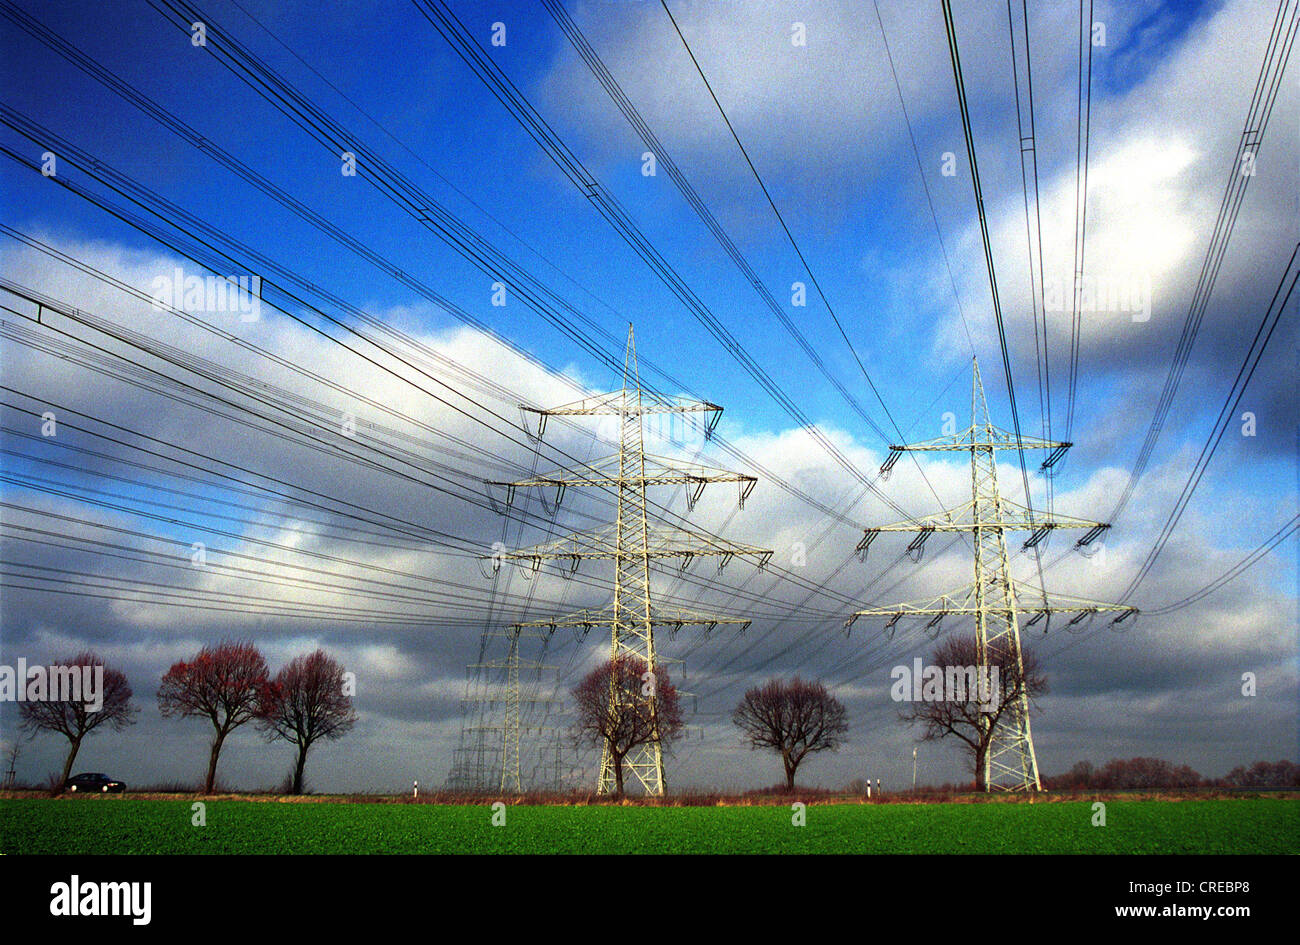 Electricity pylons in Essen, Germany Stock Photo